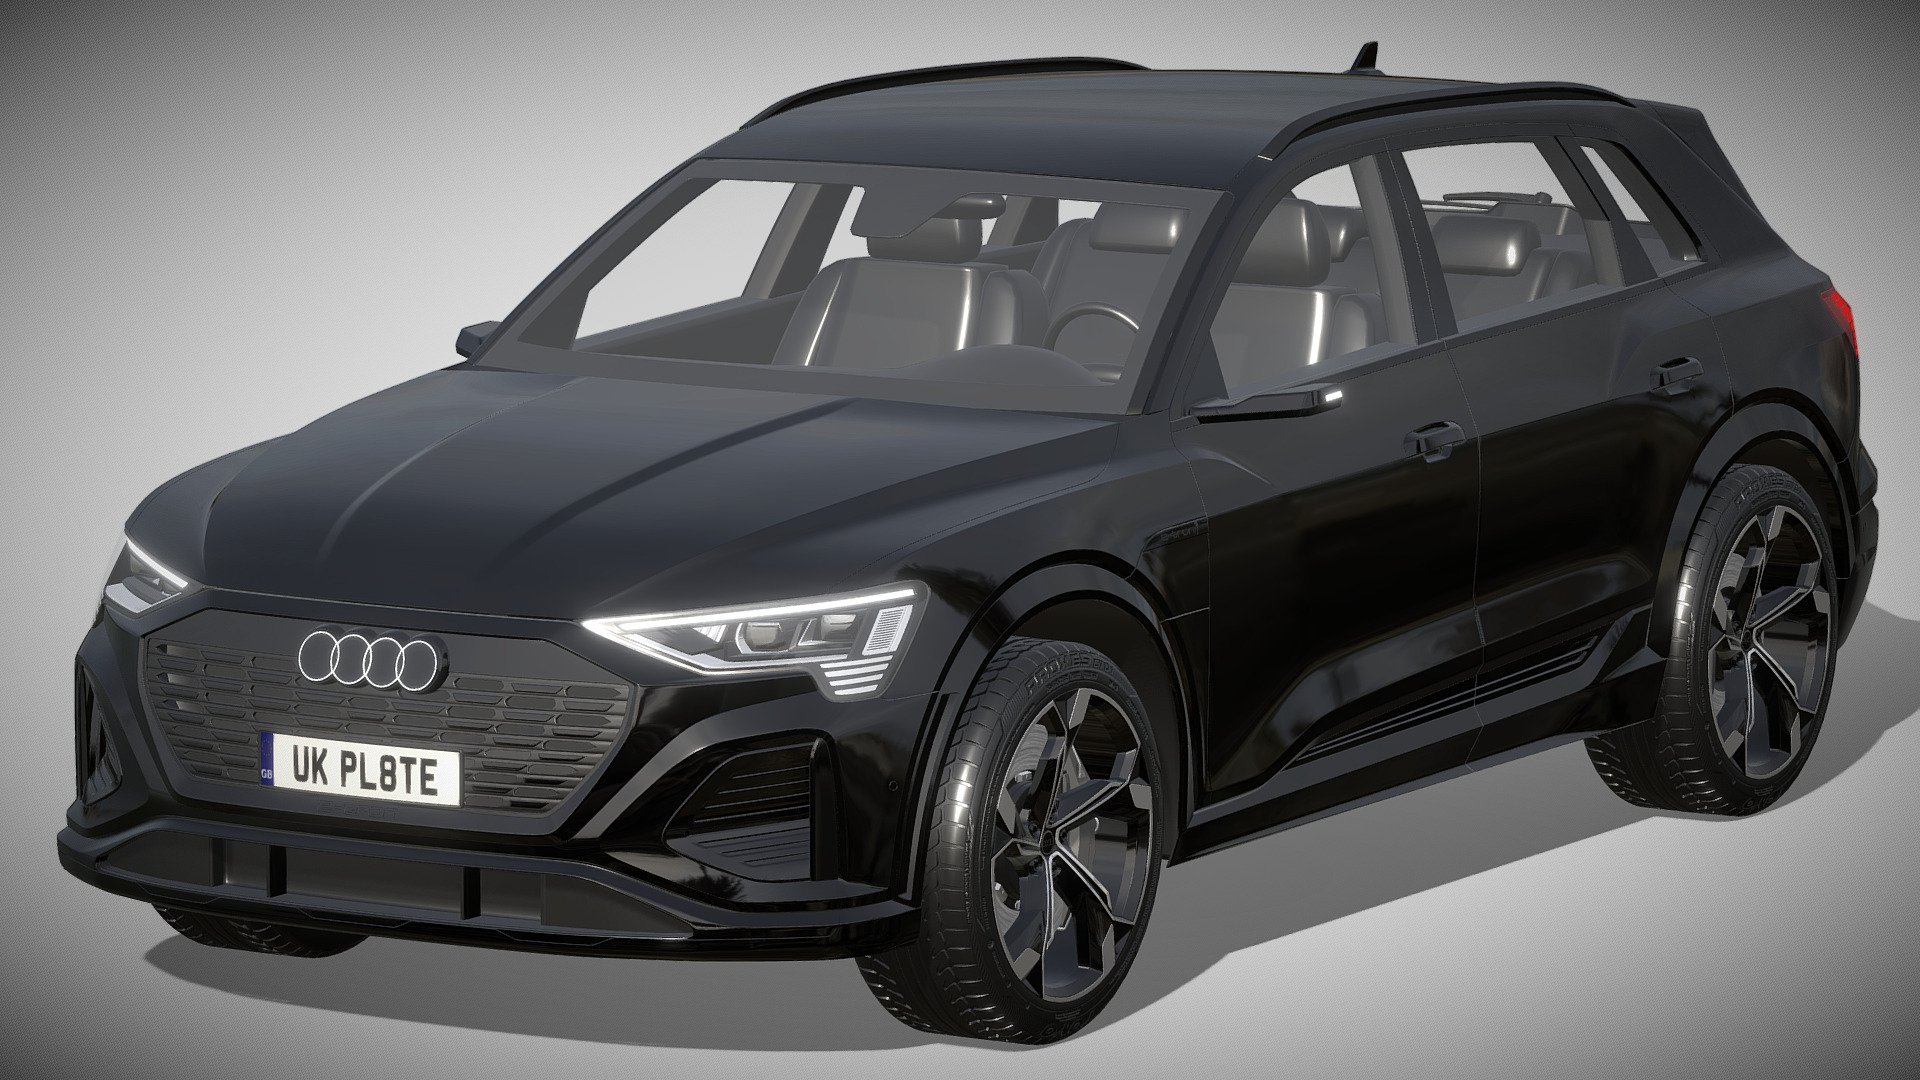 Audi SQ8 e-tron

https://www.audi.de/de/brand/de/neuwagen/q8-e-tron/sq8-e-tron.html

Clean geometry Light weight model, yet completely detailed for HI-Res renders. Use for movies, Advertisements or games

Corona render and materials

All textures include in *.rar files

Lighting setup is not included in the file! - Audi SQ8 e-tron - Buy Royalty Free 3D model by zifir3d 3d model